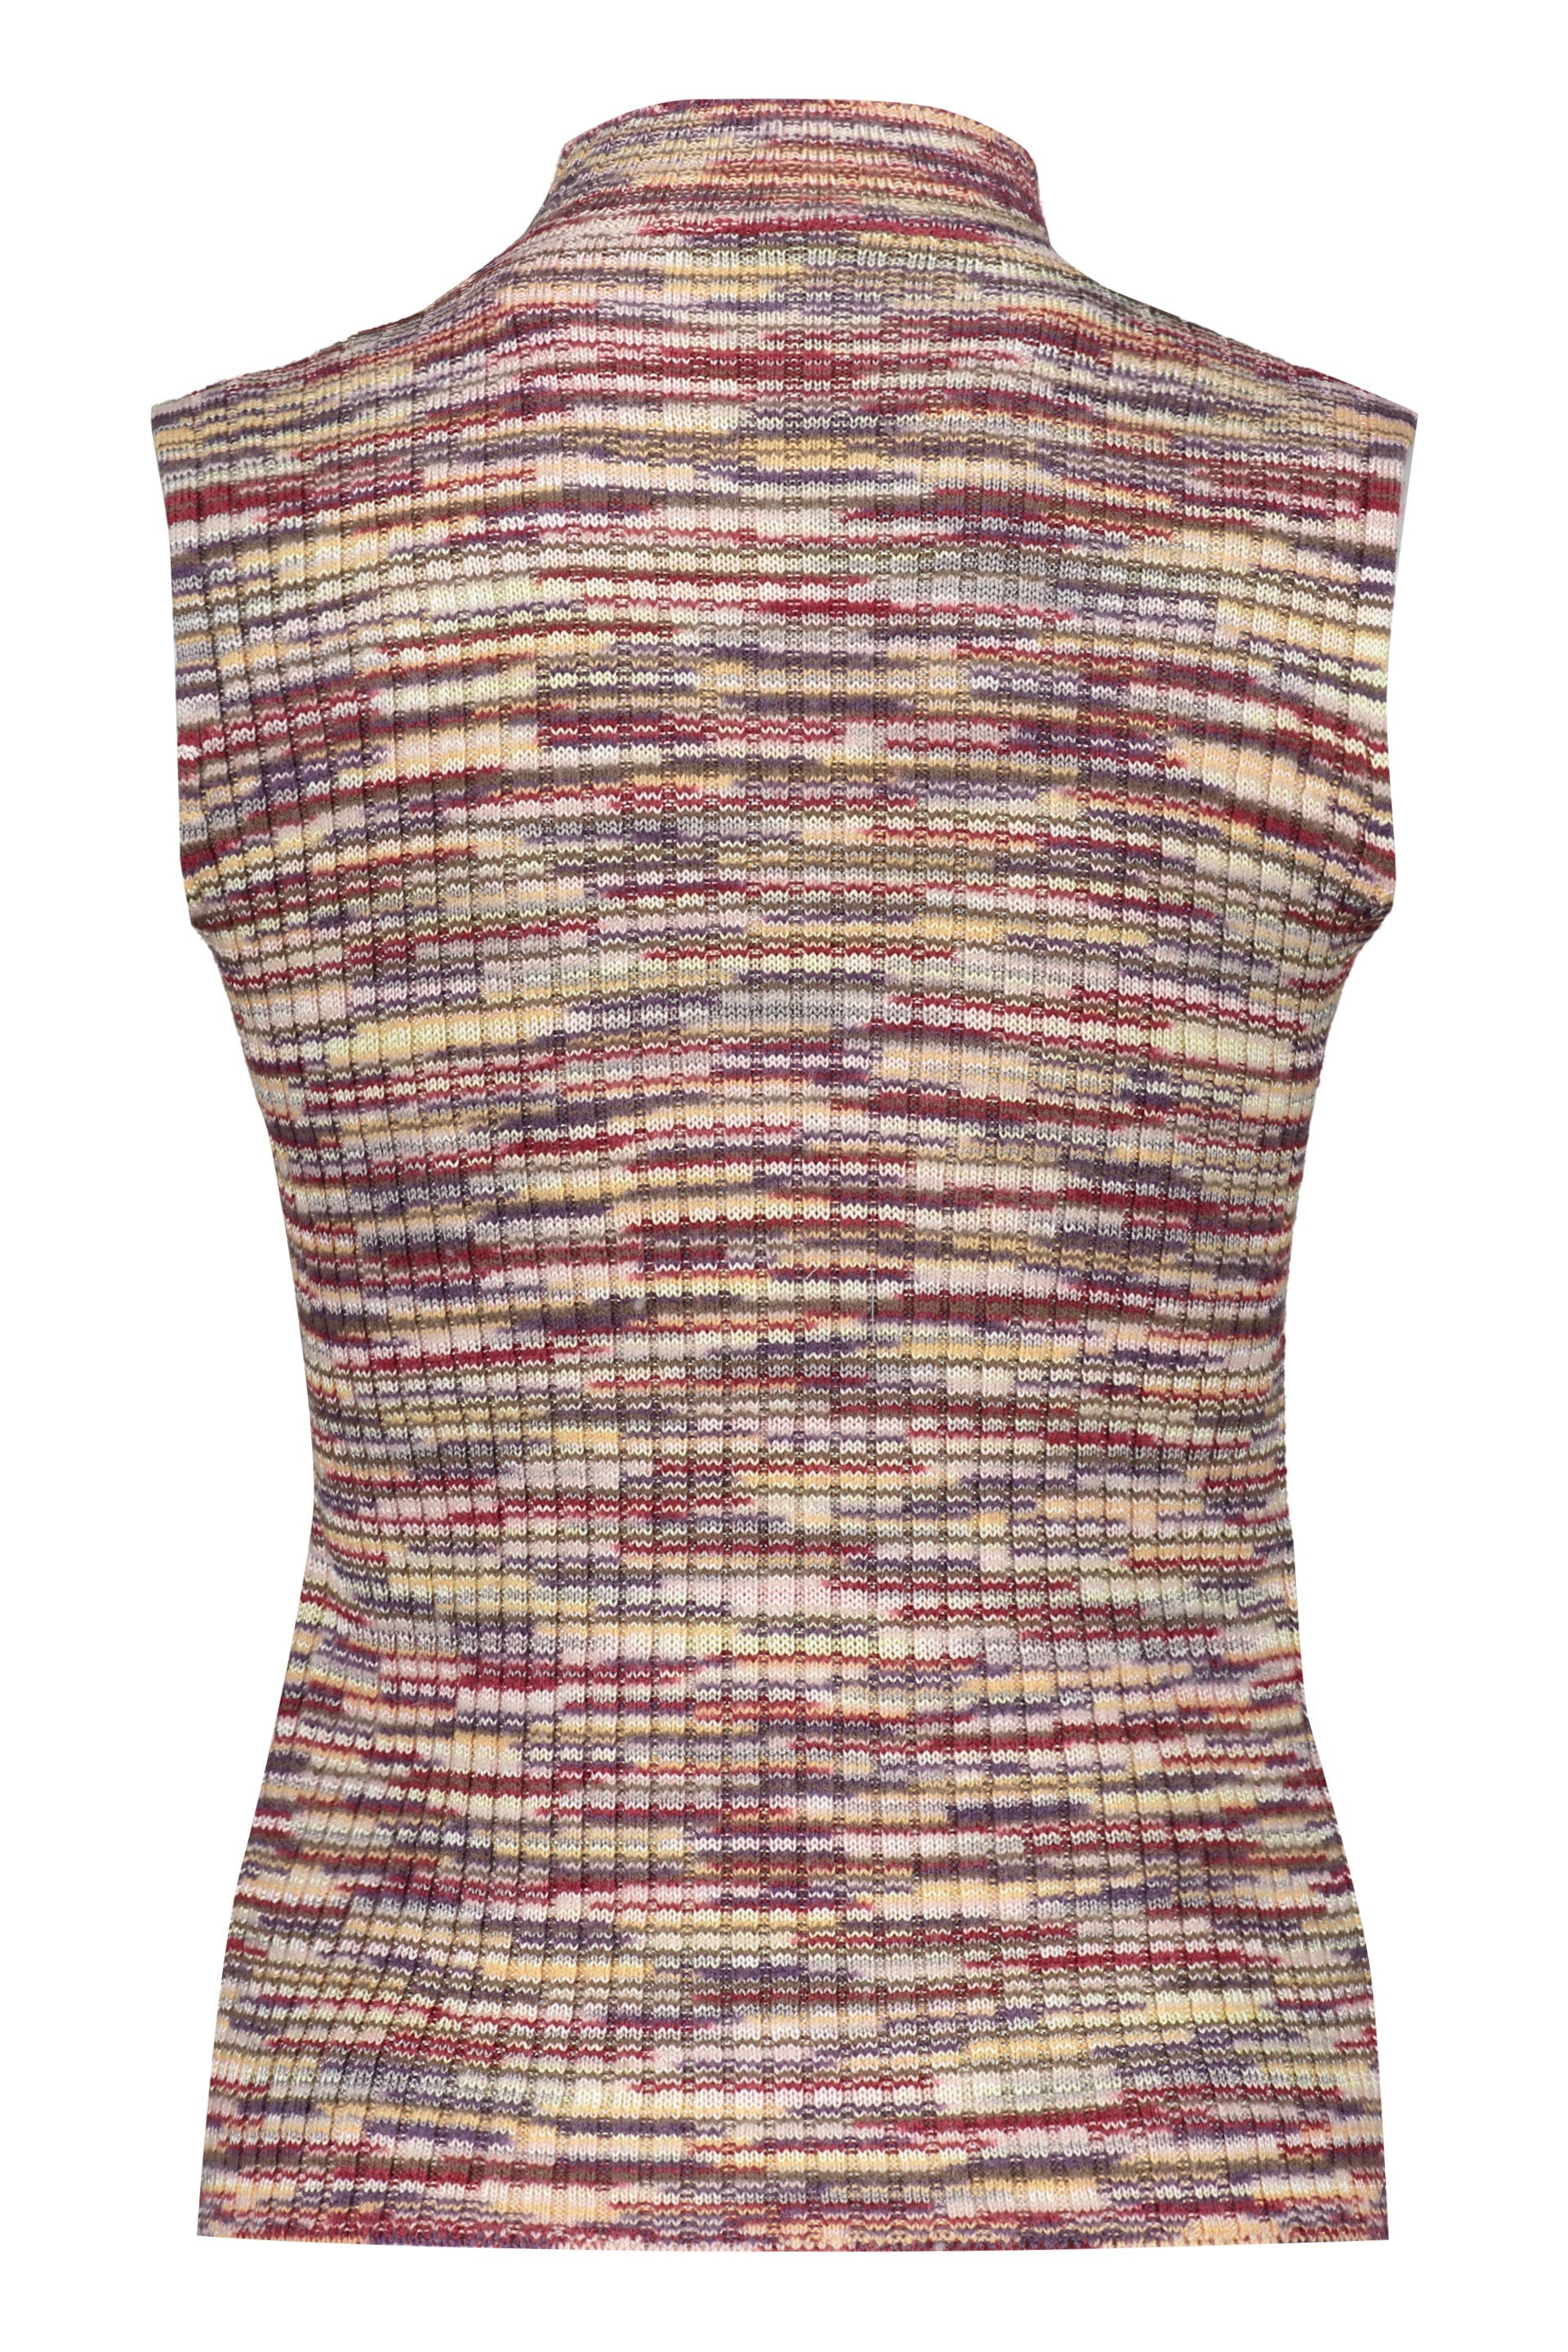 Missoni-OUTLET-SALE-Ribbed-tank-top-Shirts-L-ARCHIVE-COLLECTION-2.jpg